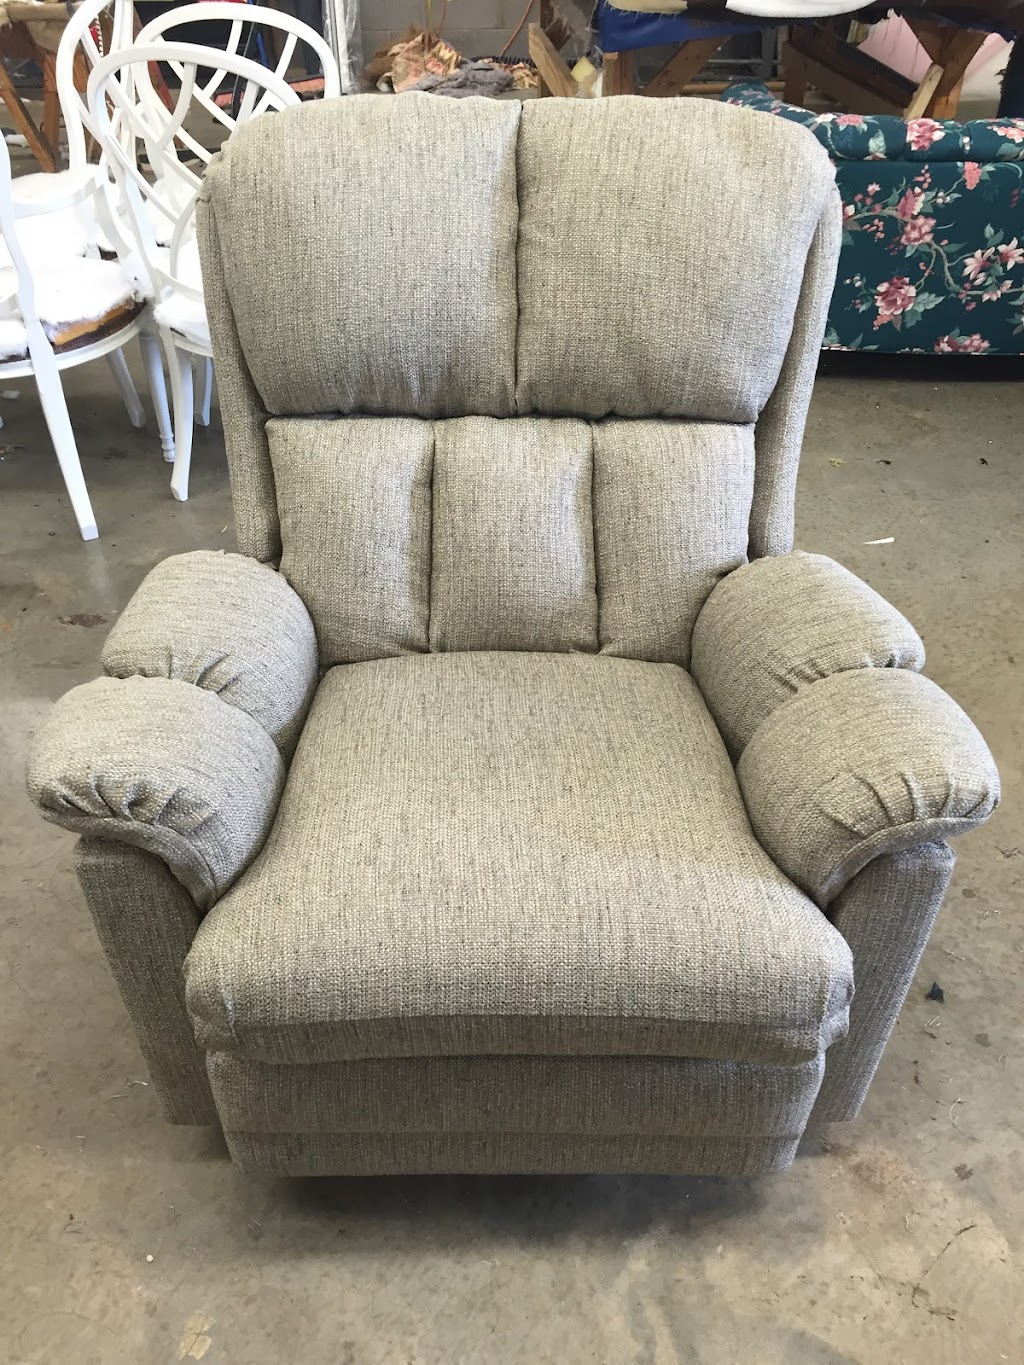 Cas-Upholstery | 12718 NC-231, Middlesex, NC 27557 | Phone: (919) 696-9495